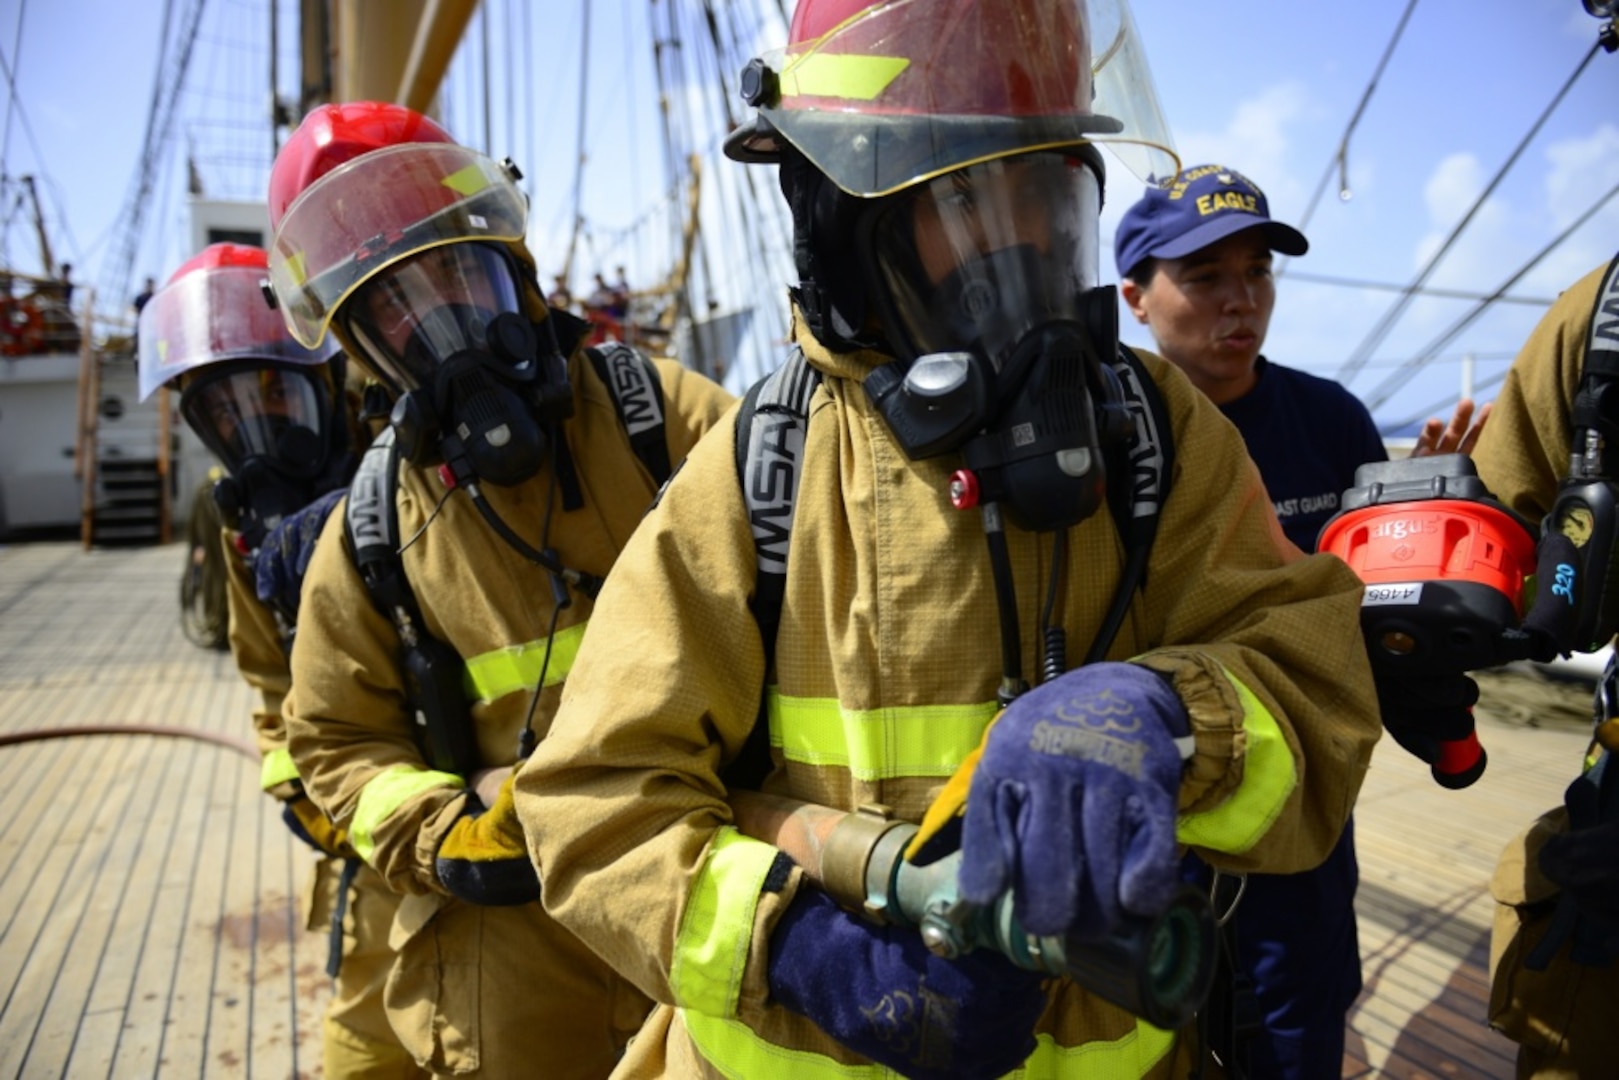 The crew and Coast Guard Academy cadets assigned to Coast Guard Cutter Eagle test their newly acquired fire fighting skills in the Caribbean Sea on June 7, 2018. The 295-foot Barque Eagle is the flagship of the U.S. Coast Guard and serves as a training vessel for cadets at the Coast Guard Academy. (U.S. Coast Guard photo by Petty Officer 3rd Class Johanna Strickland/Released)